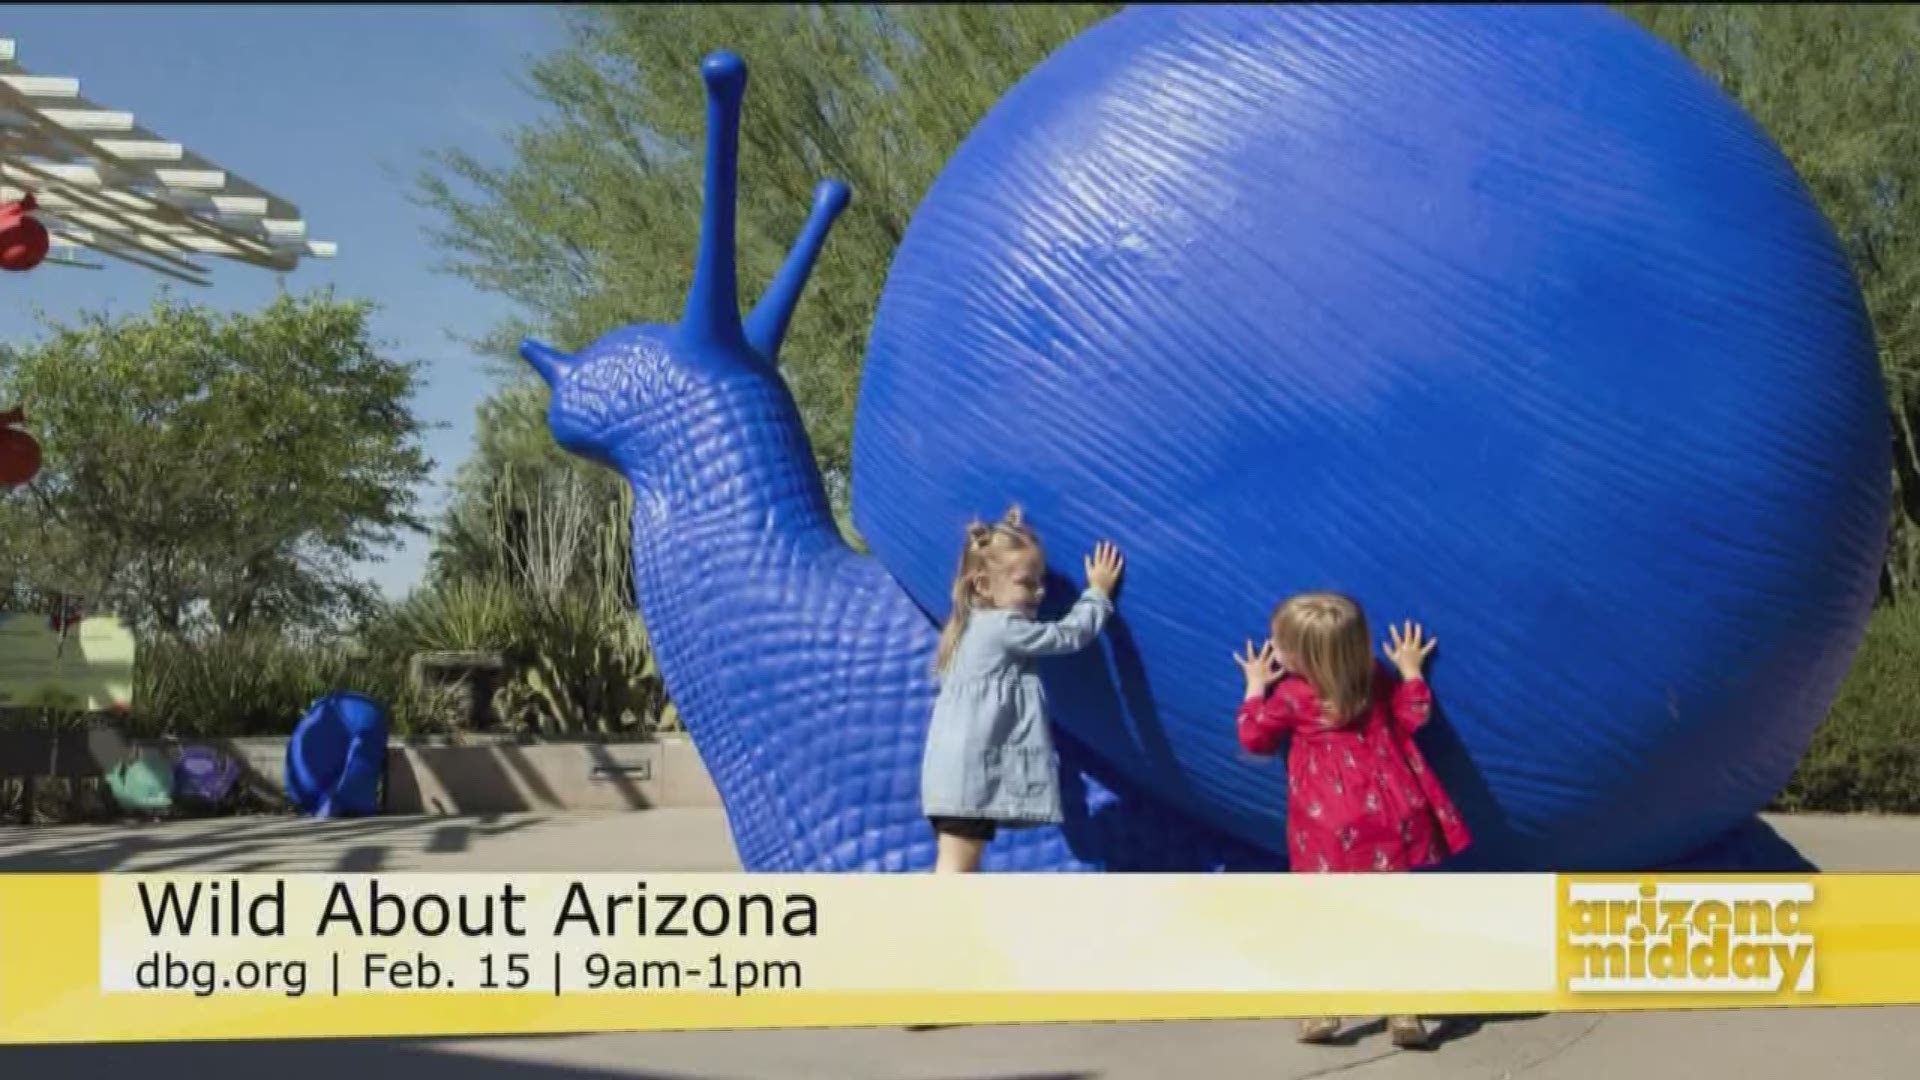 Desert Botanical Garden is hosting a family fun event this weekend to celebrate, 'getting wild' about Arizona!